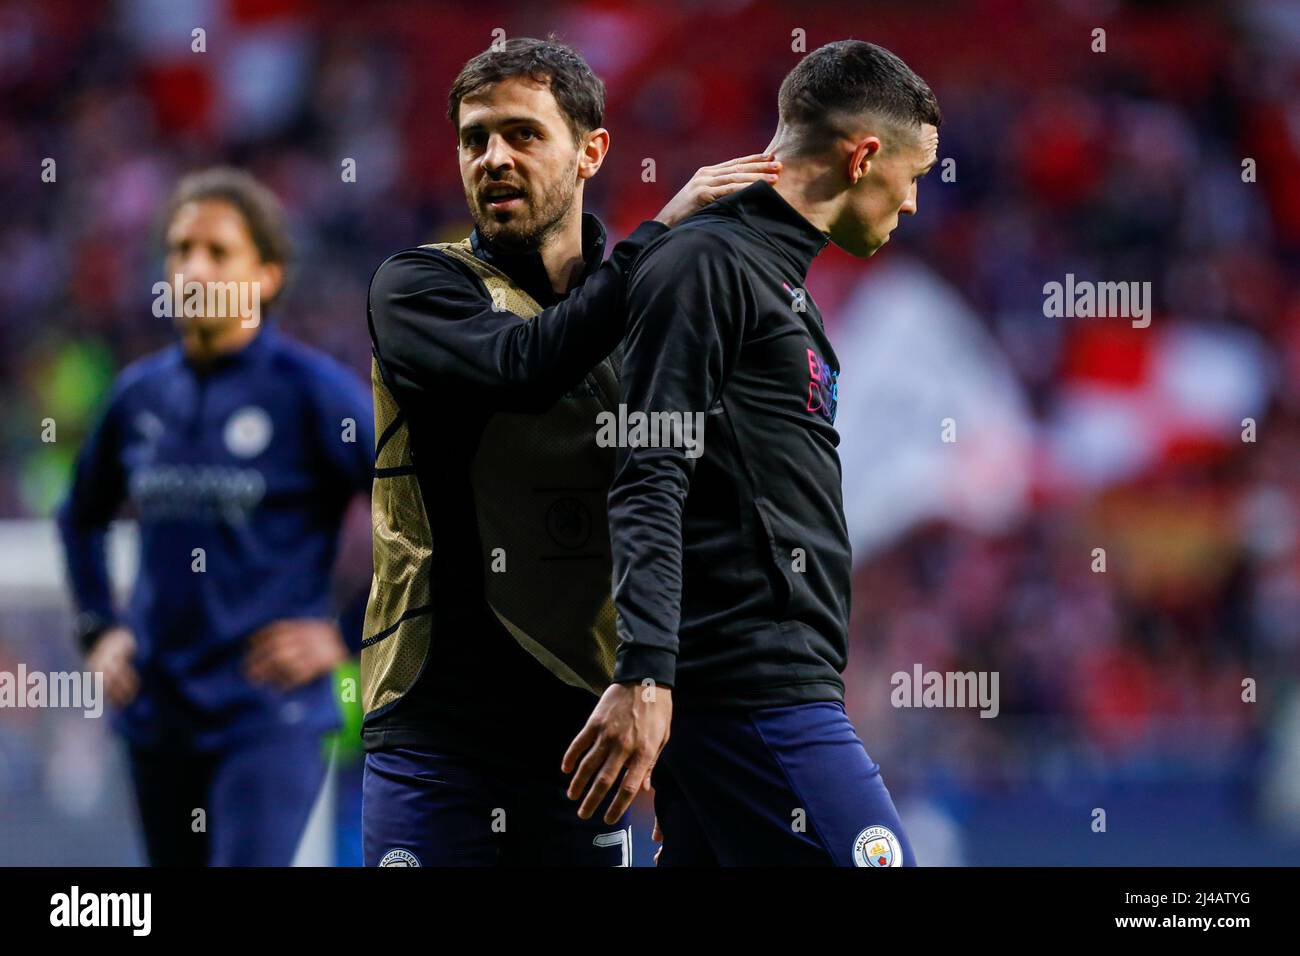 MADRID, SPAIN - APRIL 13: Bernardo Silva of Manchester City, Phil Foden of Manchester City prior to the UEFA Champions League Quarter-Finals, Second Leg match between Atlético Madrid and Manchester City at Wanda Metropolitano on April 13, 2022 in Madrid, Spain (Photo by DAX Images/Orange Pictures) Credit: Orange Pics BV/Alamy Live News Stock Photo